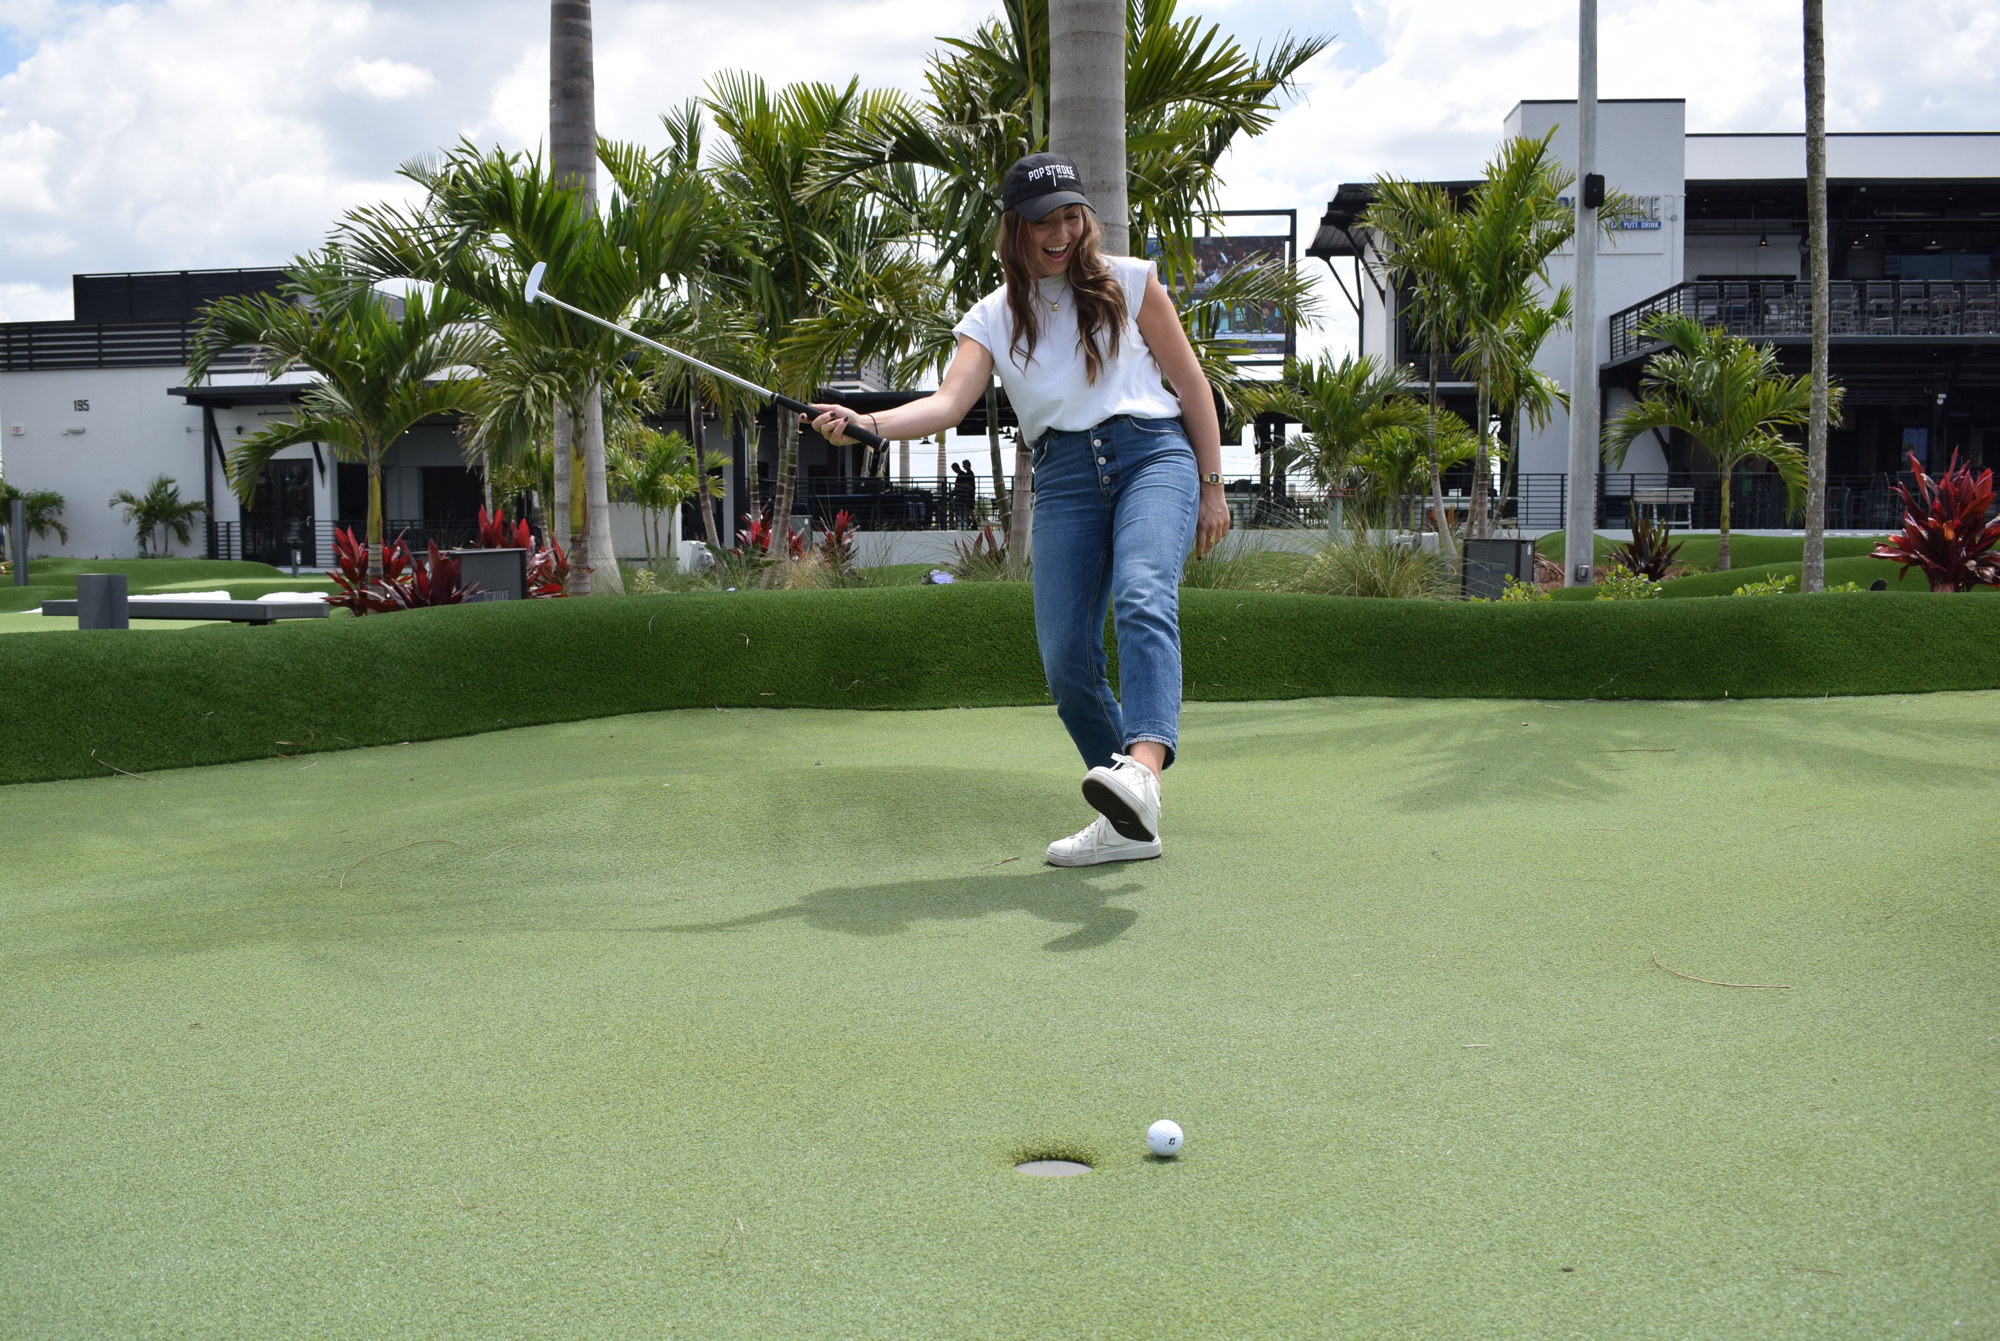 PopStroke's Tammy Hutchison reacts to a putt that just missed the cup at the new Sarasota location that opens April 28.